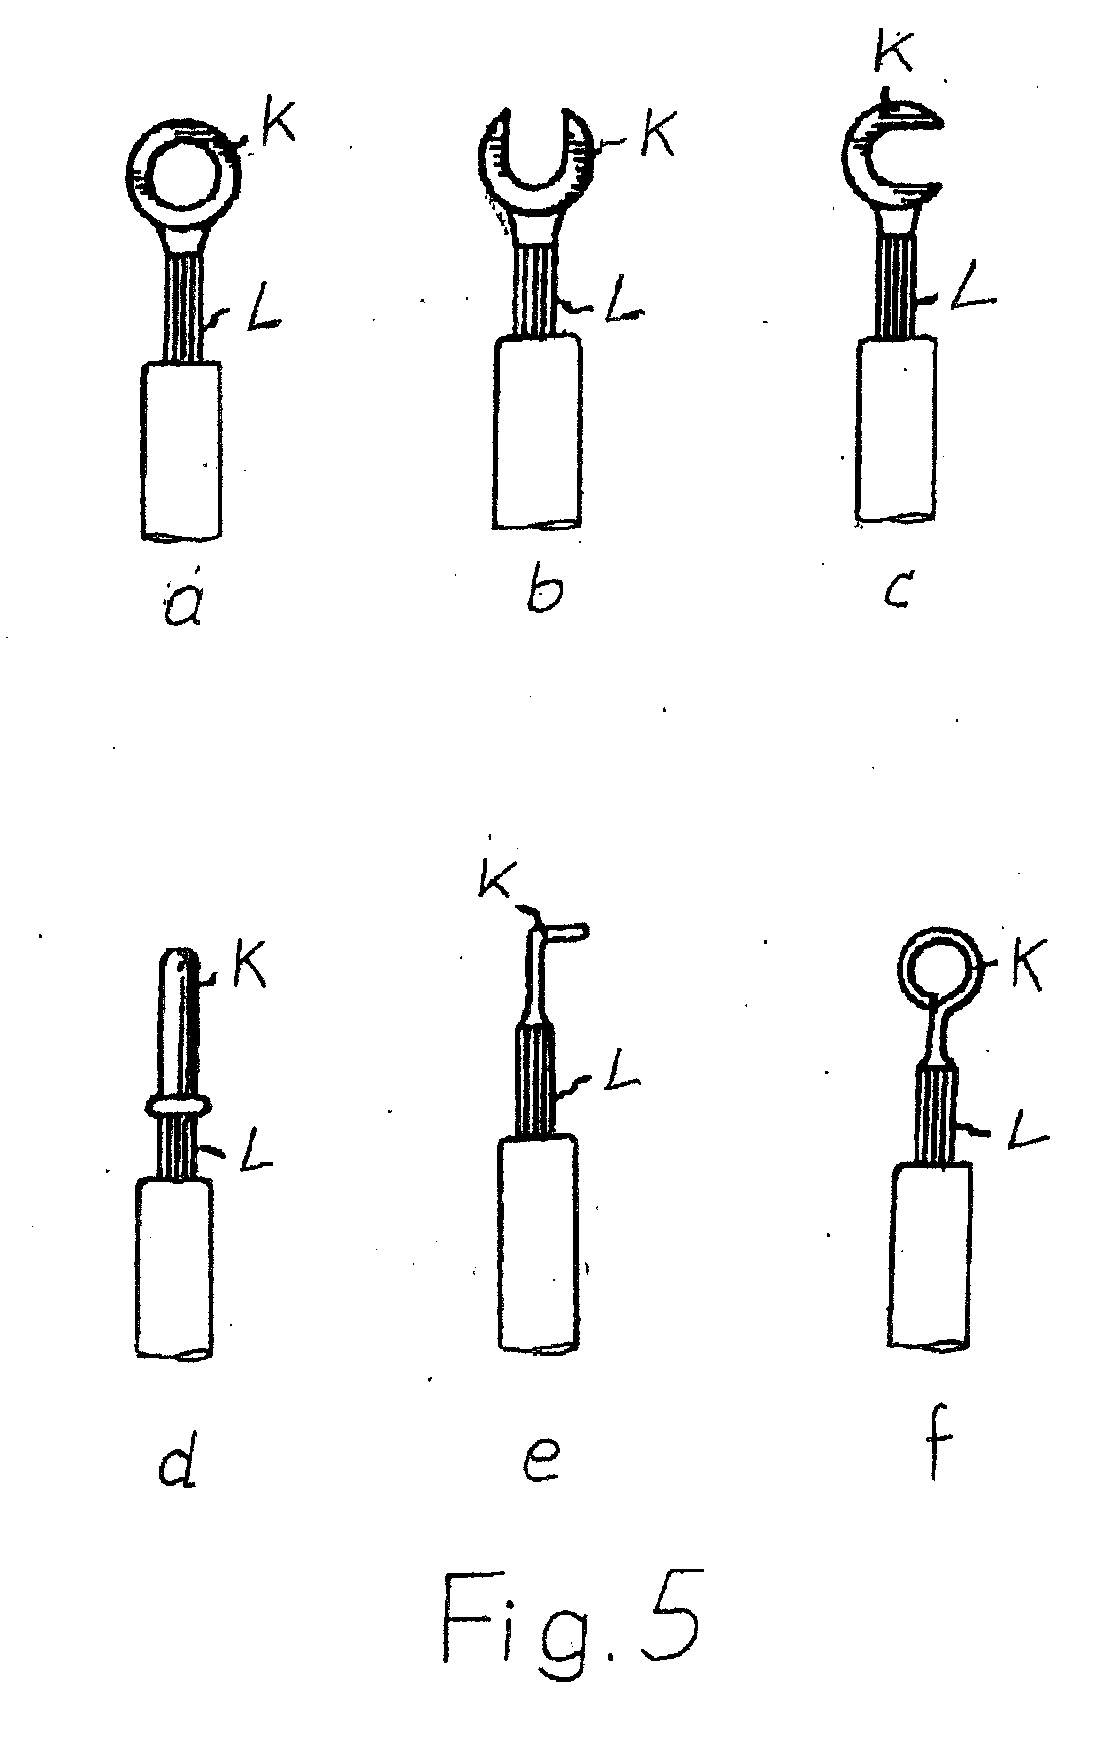 Method for attaching a contact element to the end of an electrical conductor